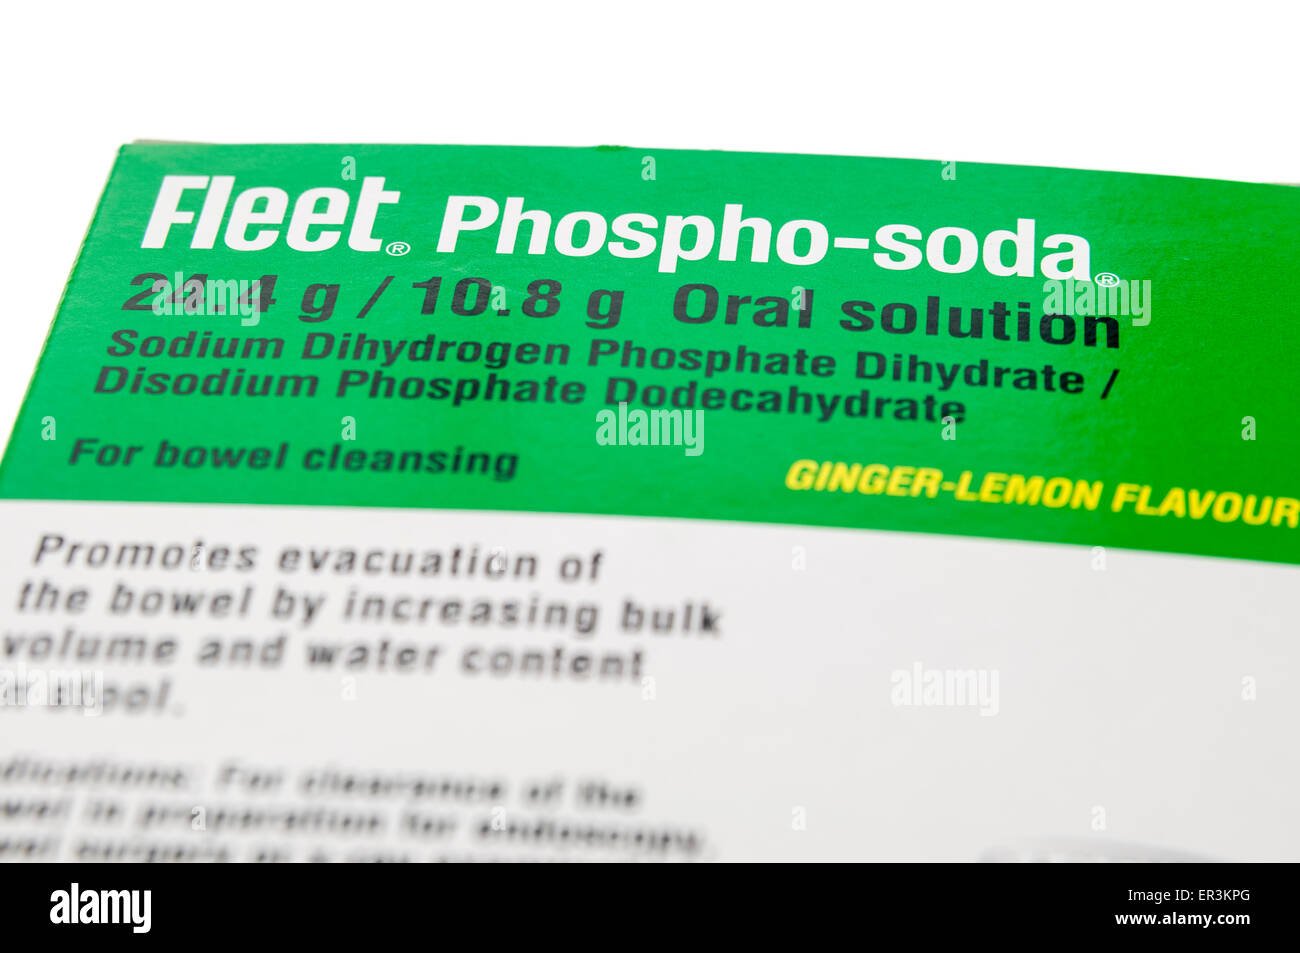 Fleet phospho-soda bowl preparation oral solution, used to clear bowels prior to procedures such as colonoscopies. Stock Photo